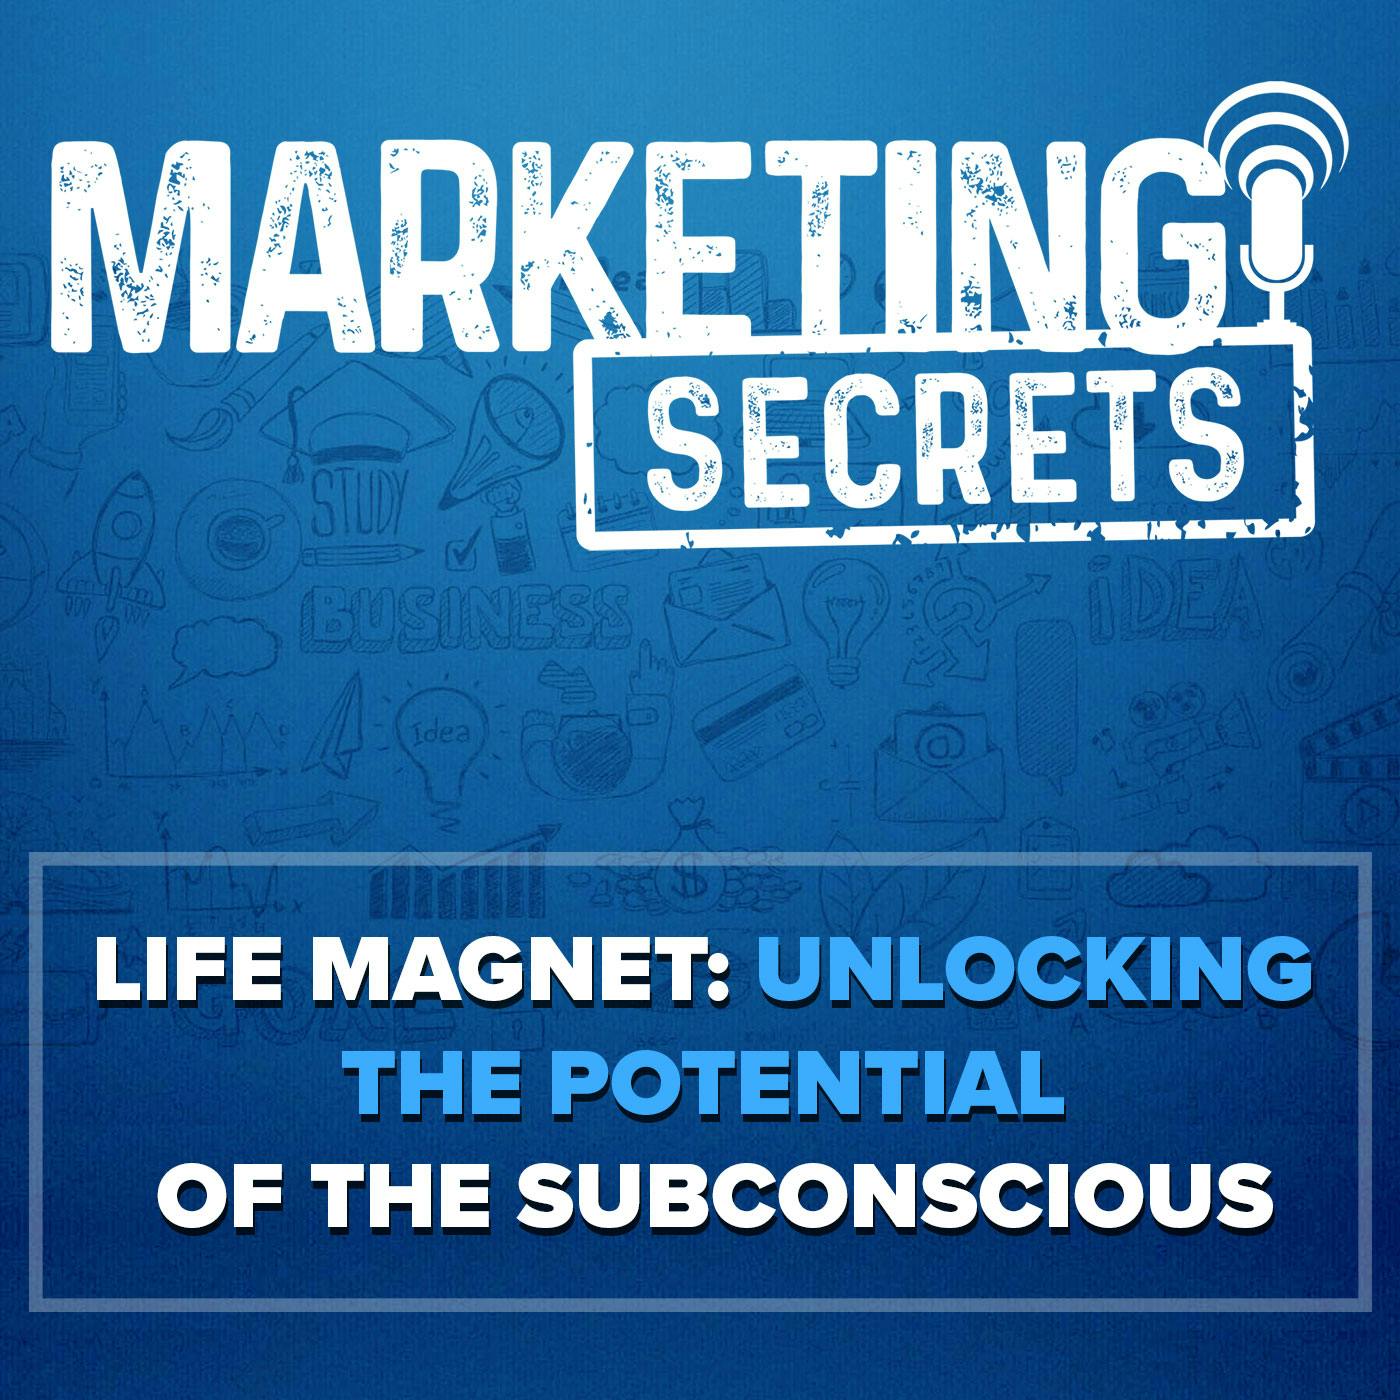 Life Magnet: Unlocking The Potential of the Subconscious